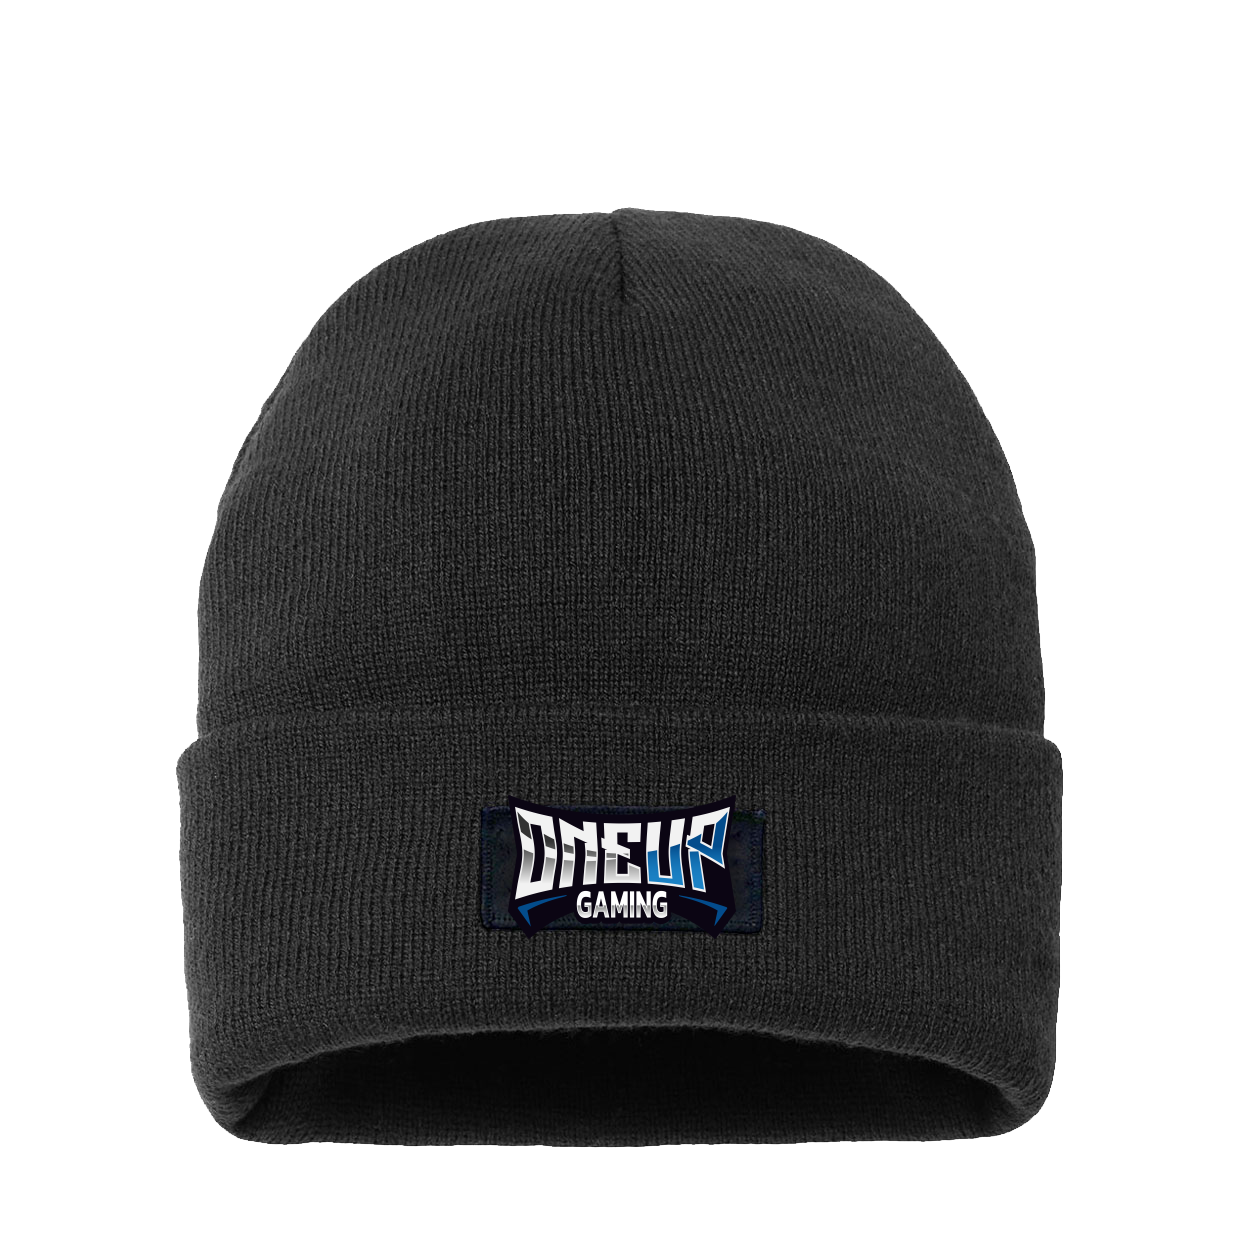 One Up Gaming Night Out Woven Patch Night Out Sherpa Lined Cuffed Beanie Black 